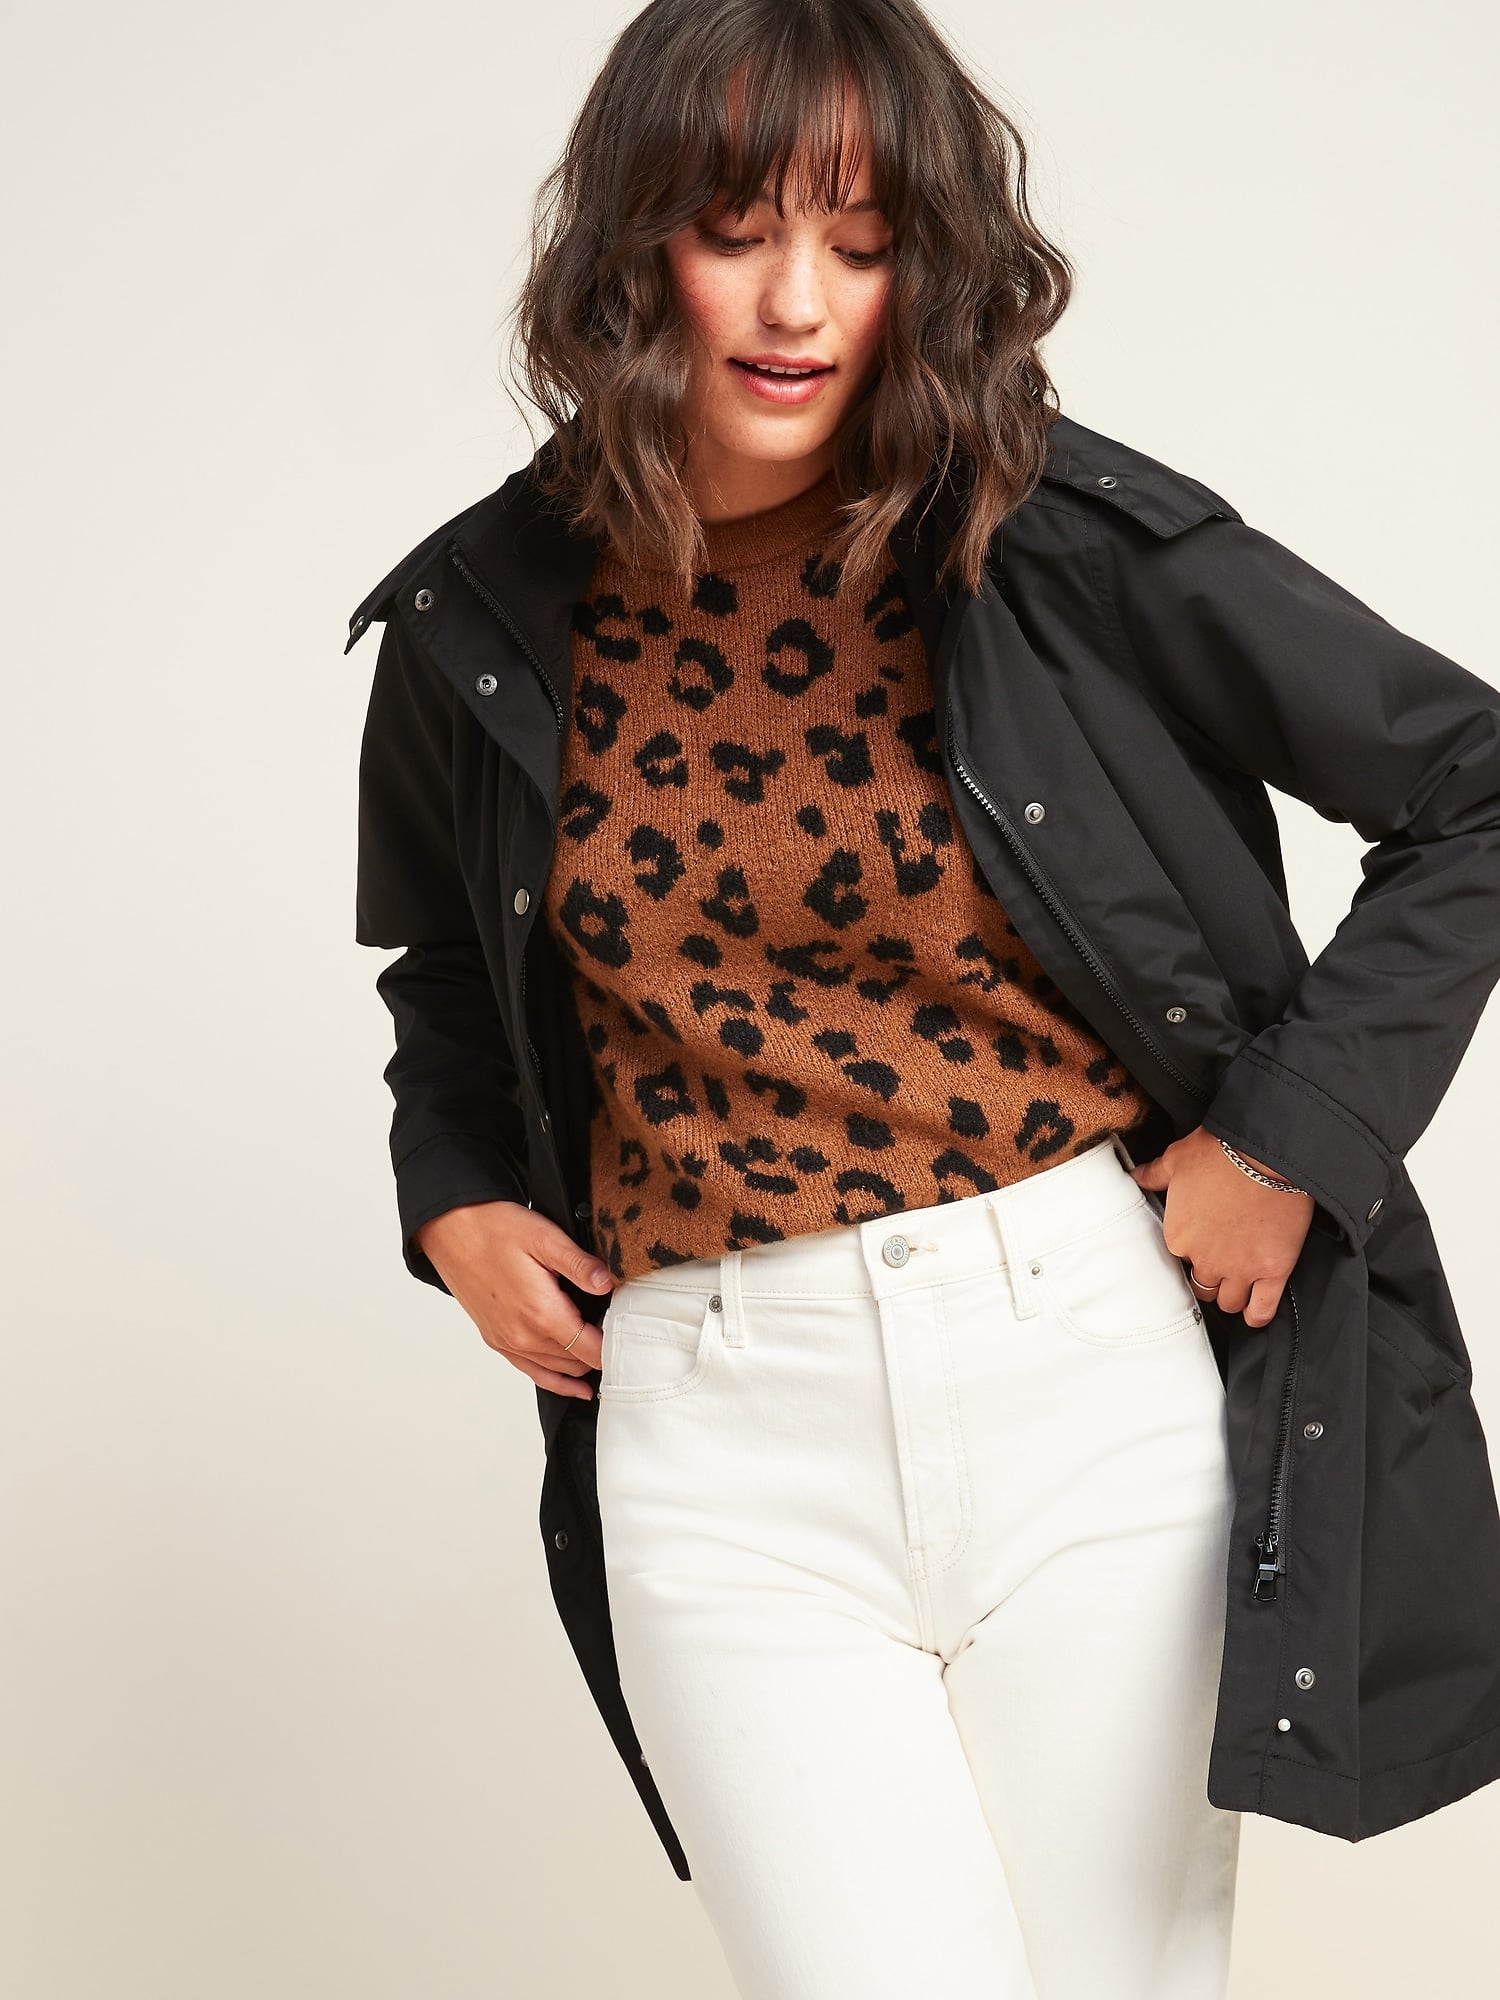 Best Fall Jackets and Coats For Women at Old Navy